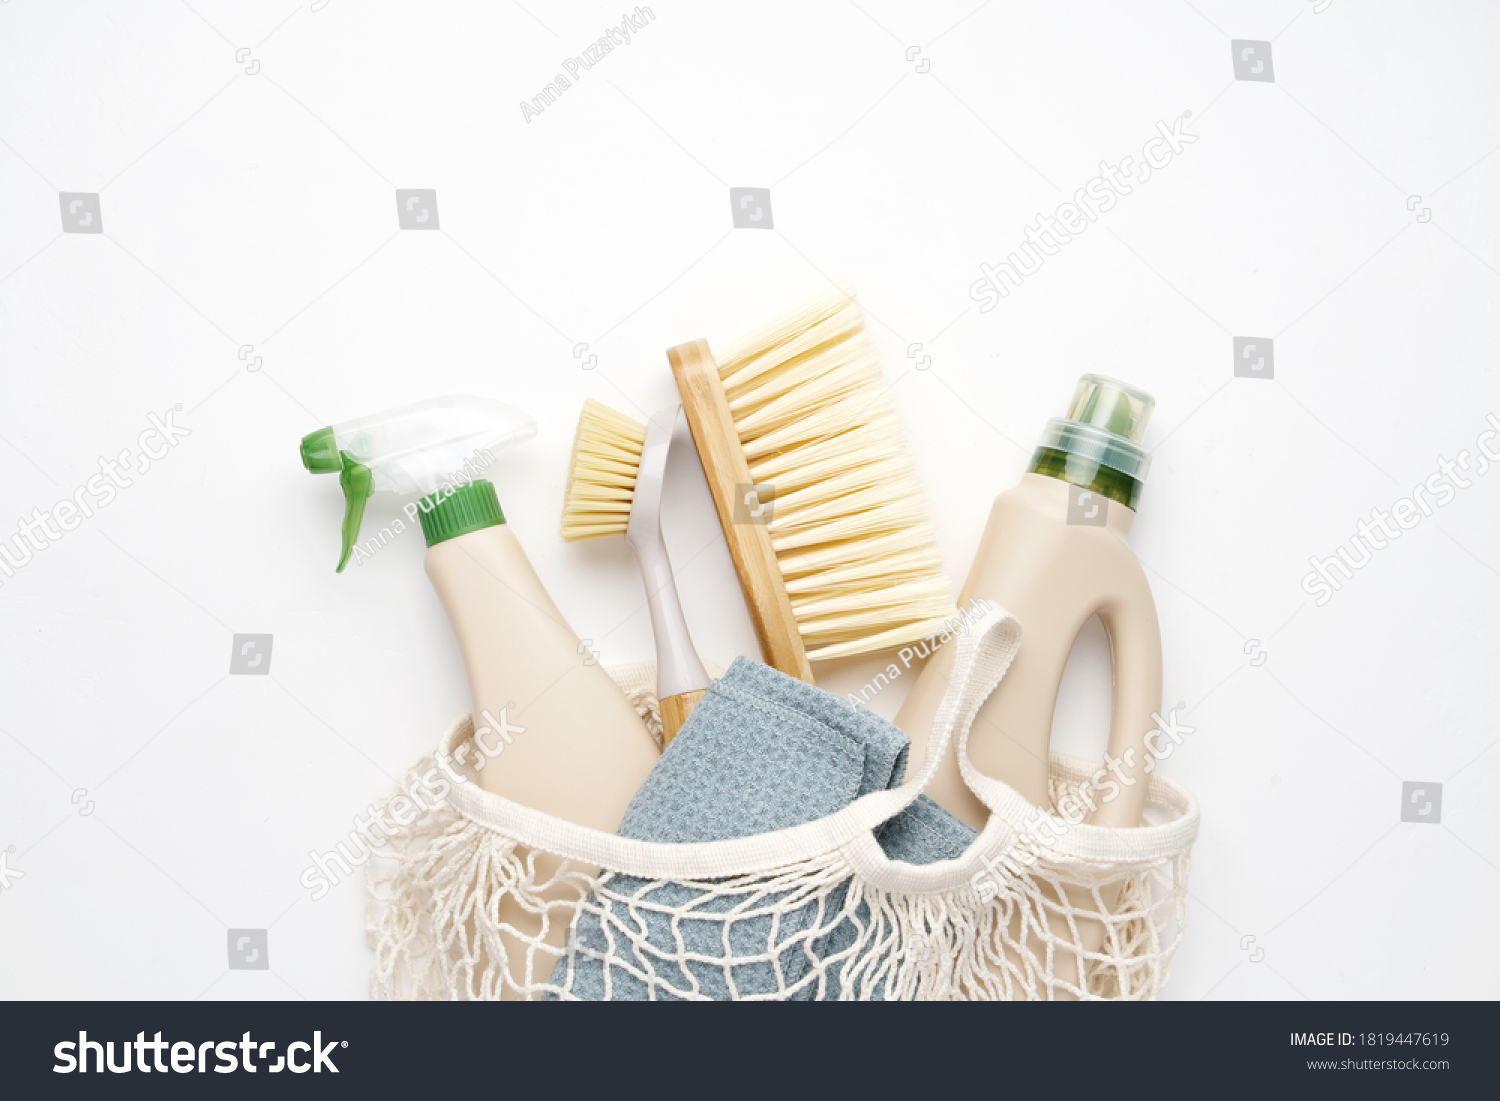 Eco brushes and rag on white background. Flat lay eco cleaning products. Cleaner concept  #1819447619